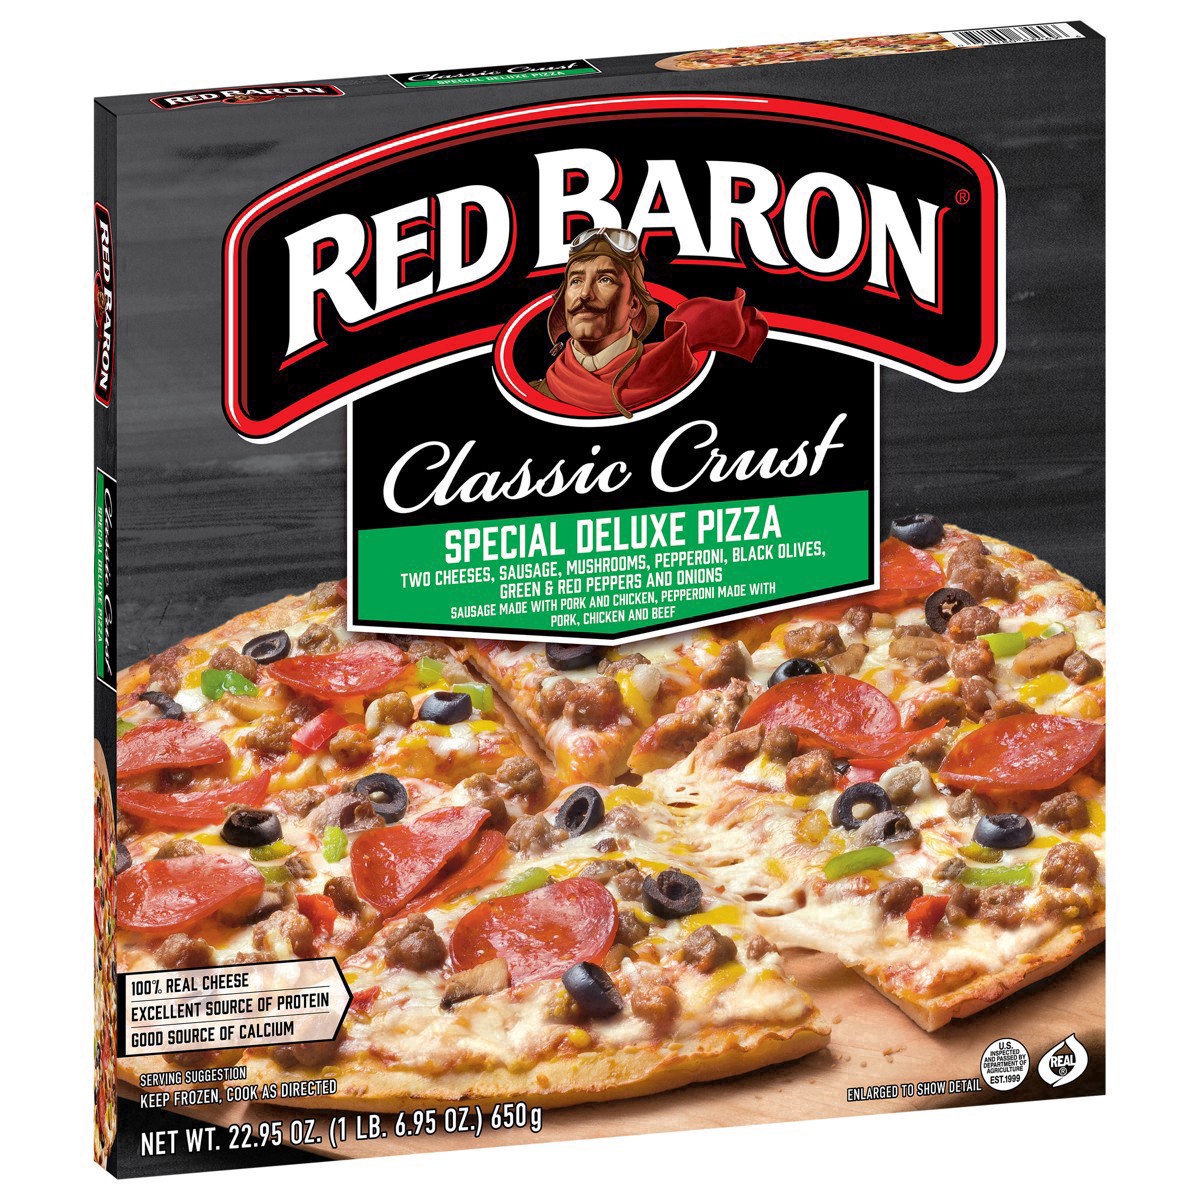 slide 68 of 89, Red Baron Frozen Pizza Classic Crust Special Deluxe, 1.43 lb